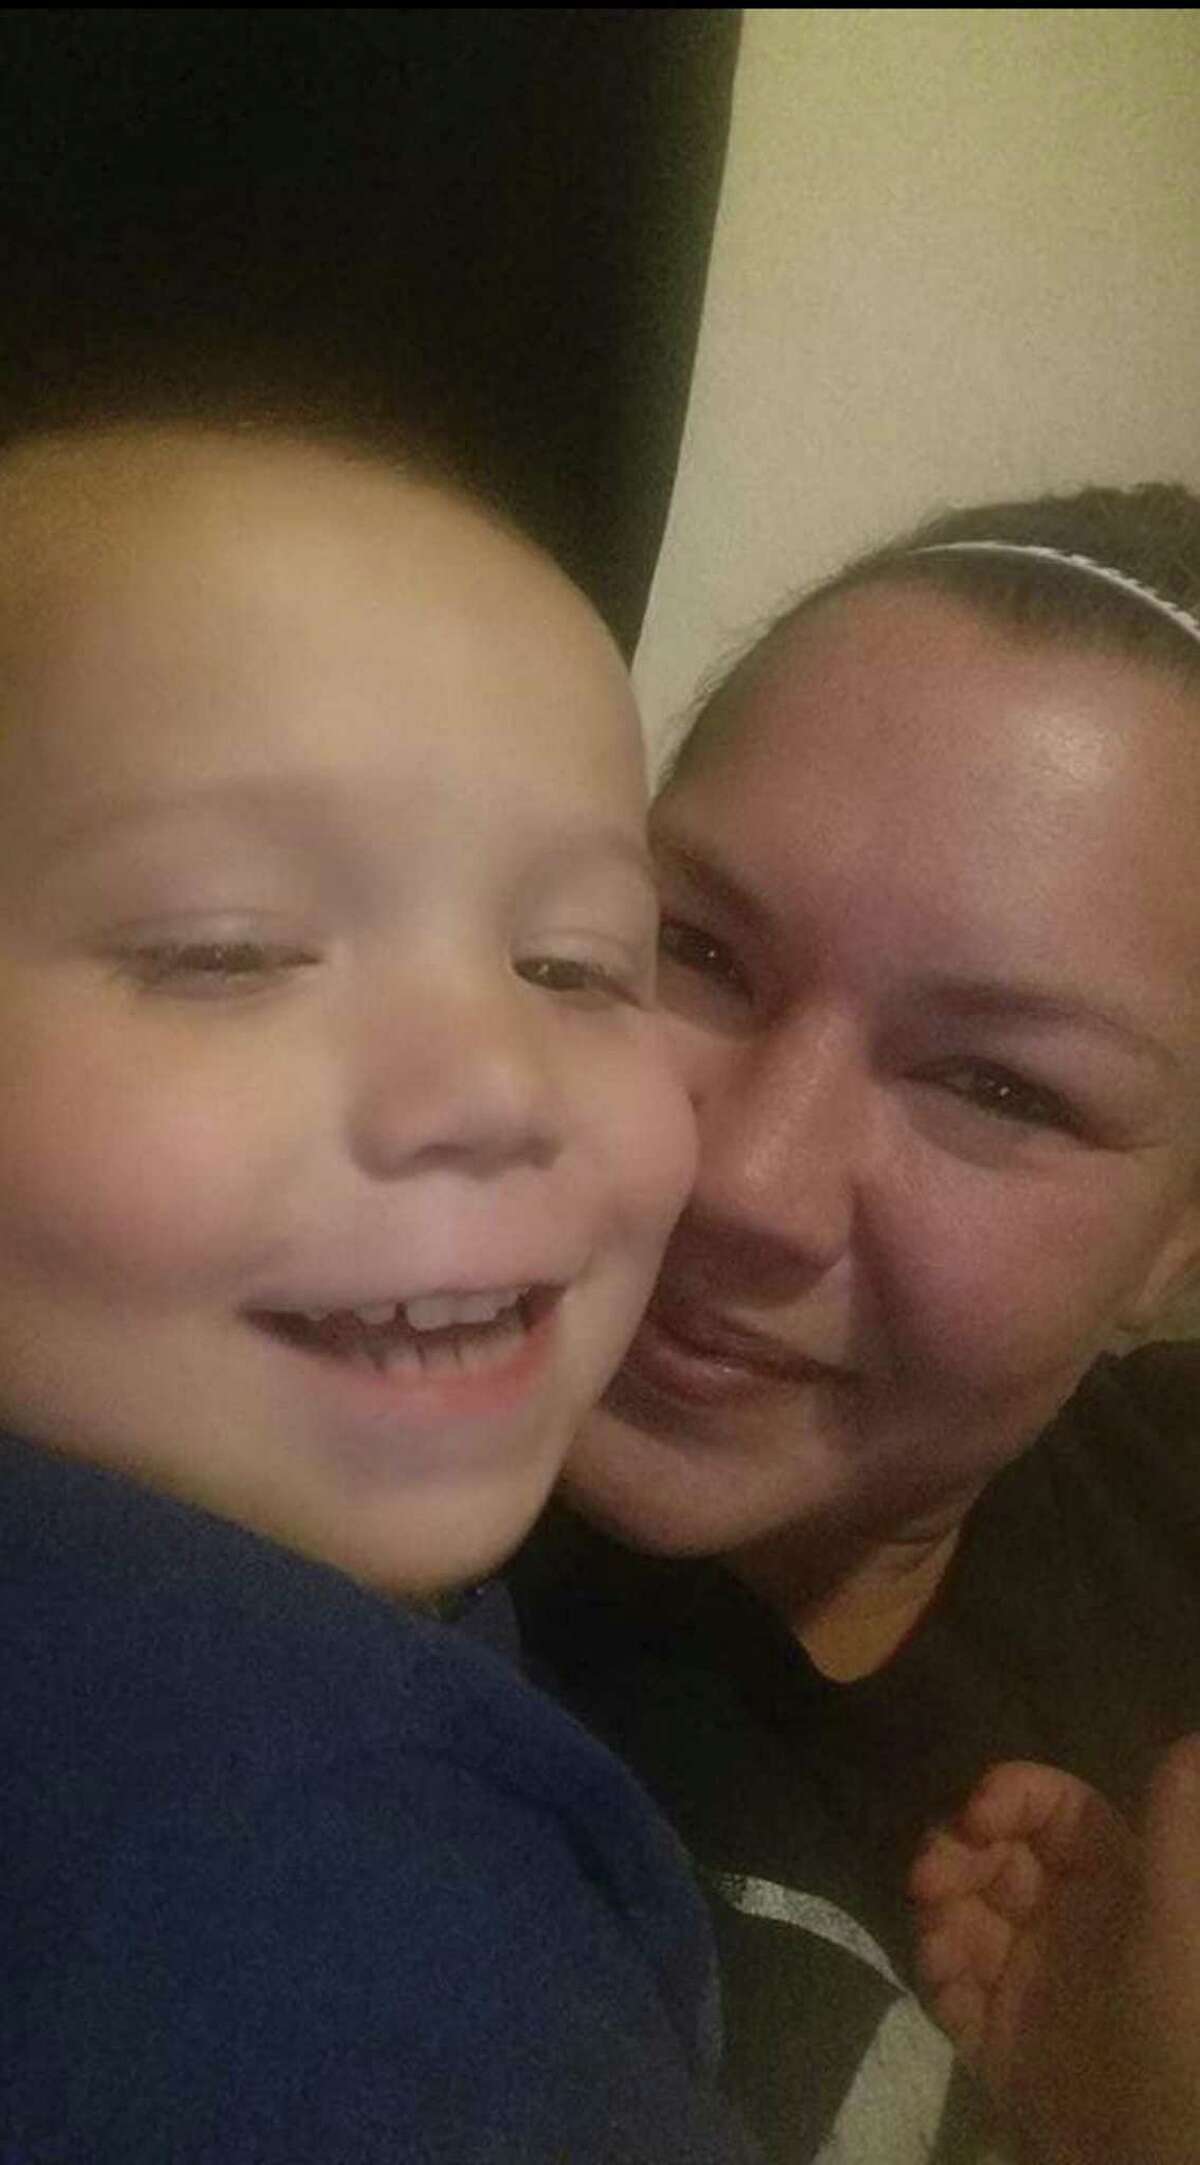 Joann Ward and her son, Ryland Ward. The little boy, who was shot five times in the Sutherland Springs church massacre turned 6 during his hospital stay. He was released from the hospital Jan. 11, 2018.